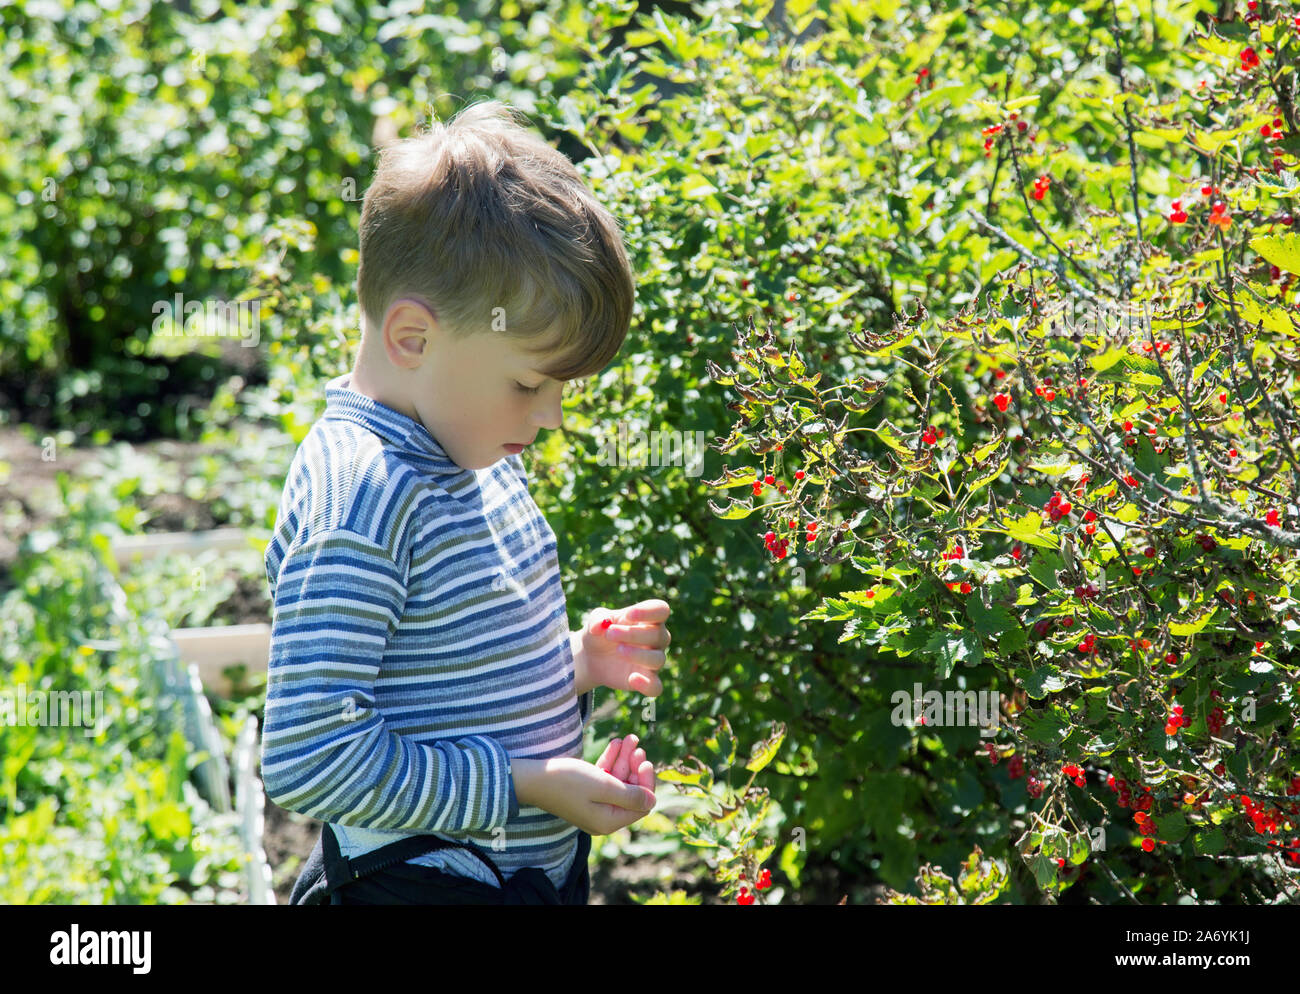 seven-year-old boy tears the berries of a red look from a bush in a garden Stock Photo